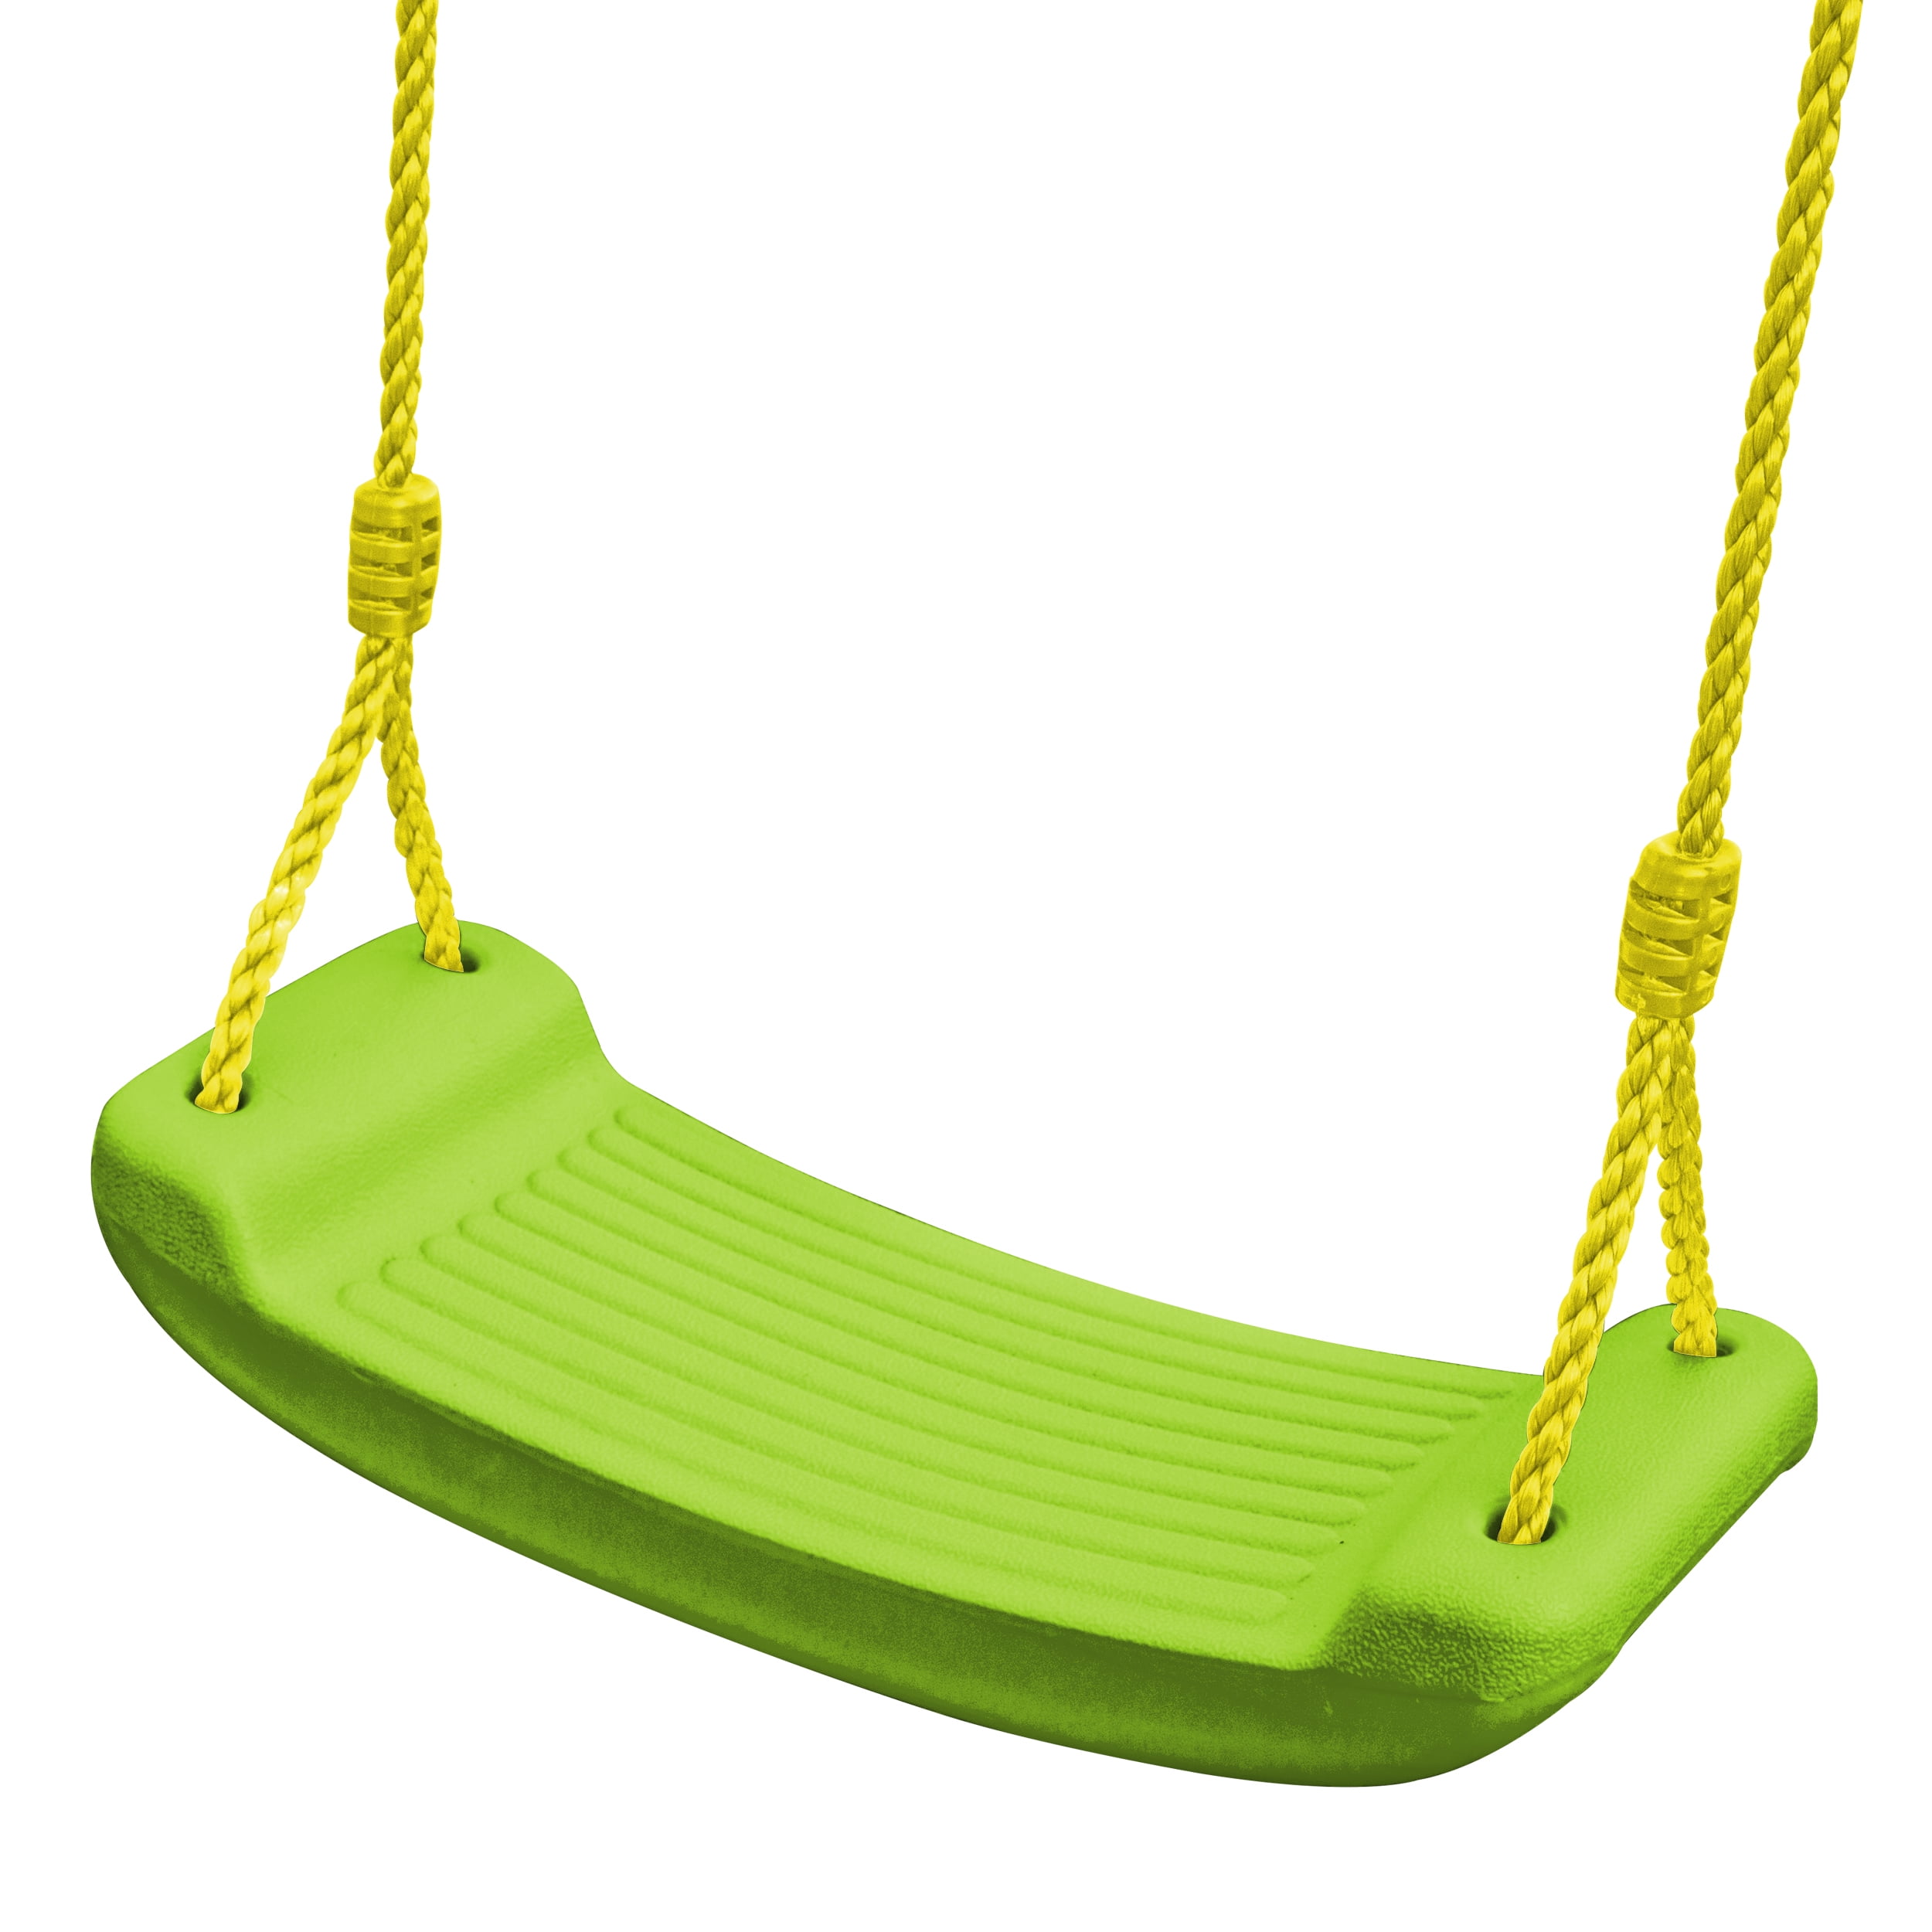 Outdoor Adult Tree Swing Seat Kids Chair Wooden Hanging Swing Seat D0P0 